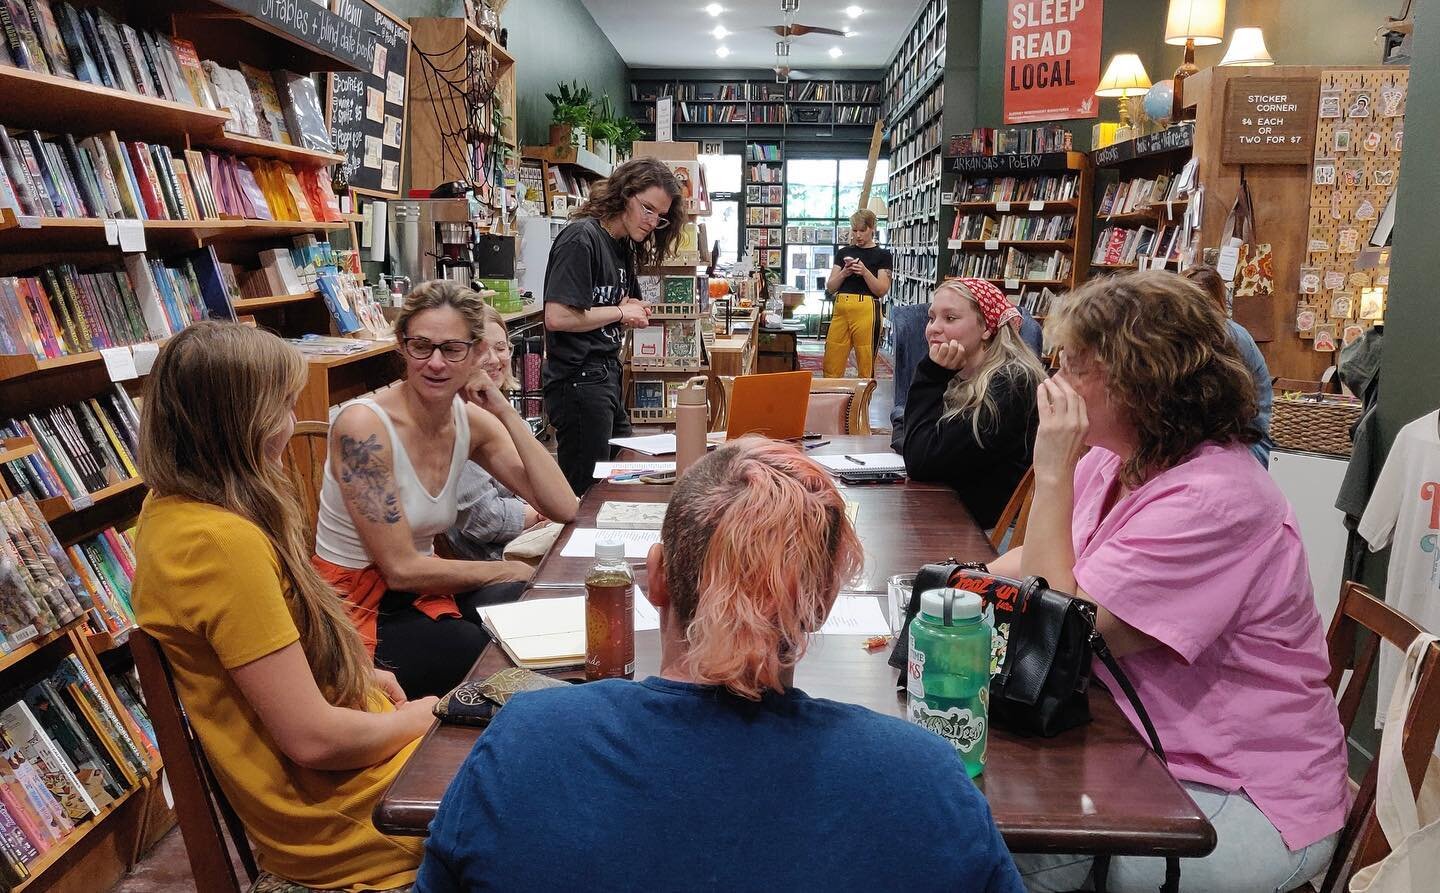 👻 On Sunday, we hung out at @pearlsbooks with the poet @cdeskilson and read some stunning, creepy poems by authors like Donika Kelly and Jericho Brown&mdash;and wrote our own monster poems in response. We also explored Kenji Liu&rsquo;s inventive, c